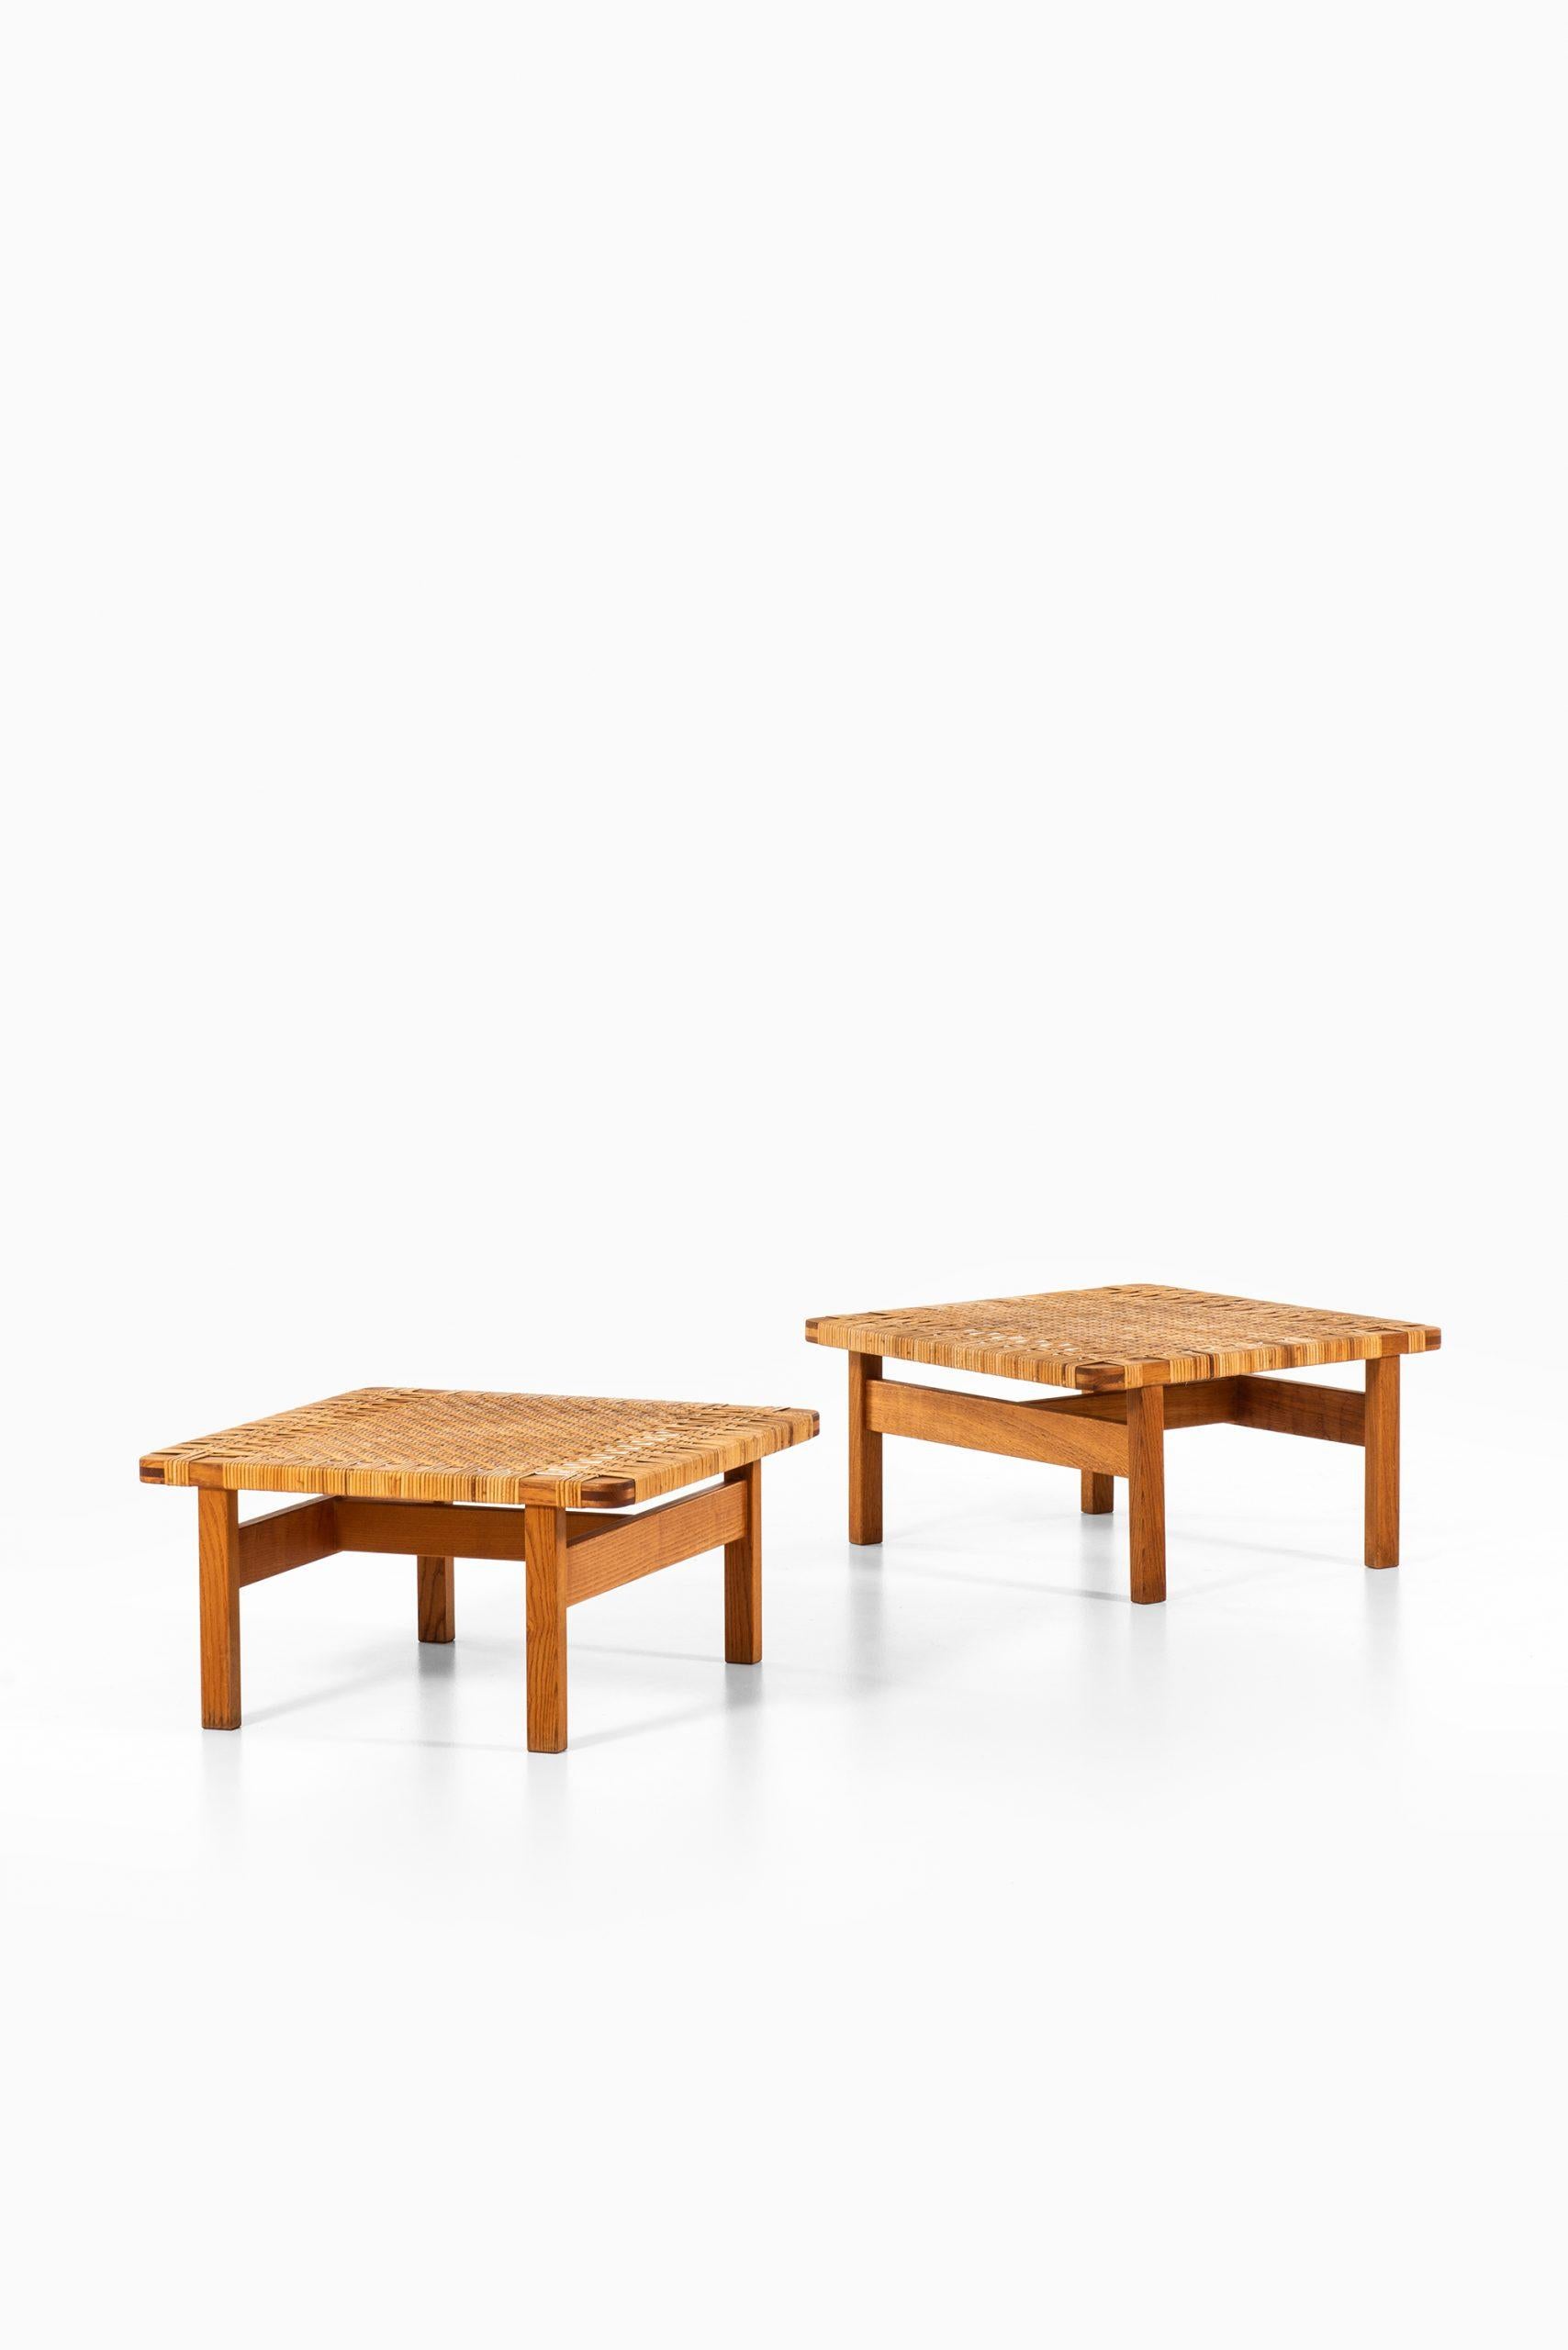 Mid-20th Century Børge Mogensen Side Tables / Benches Model 5274 by Fredericia Stolefabrik